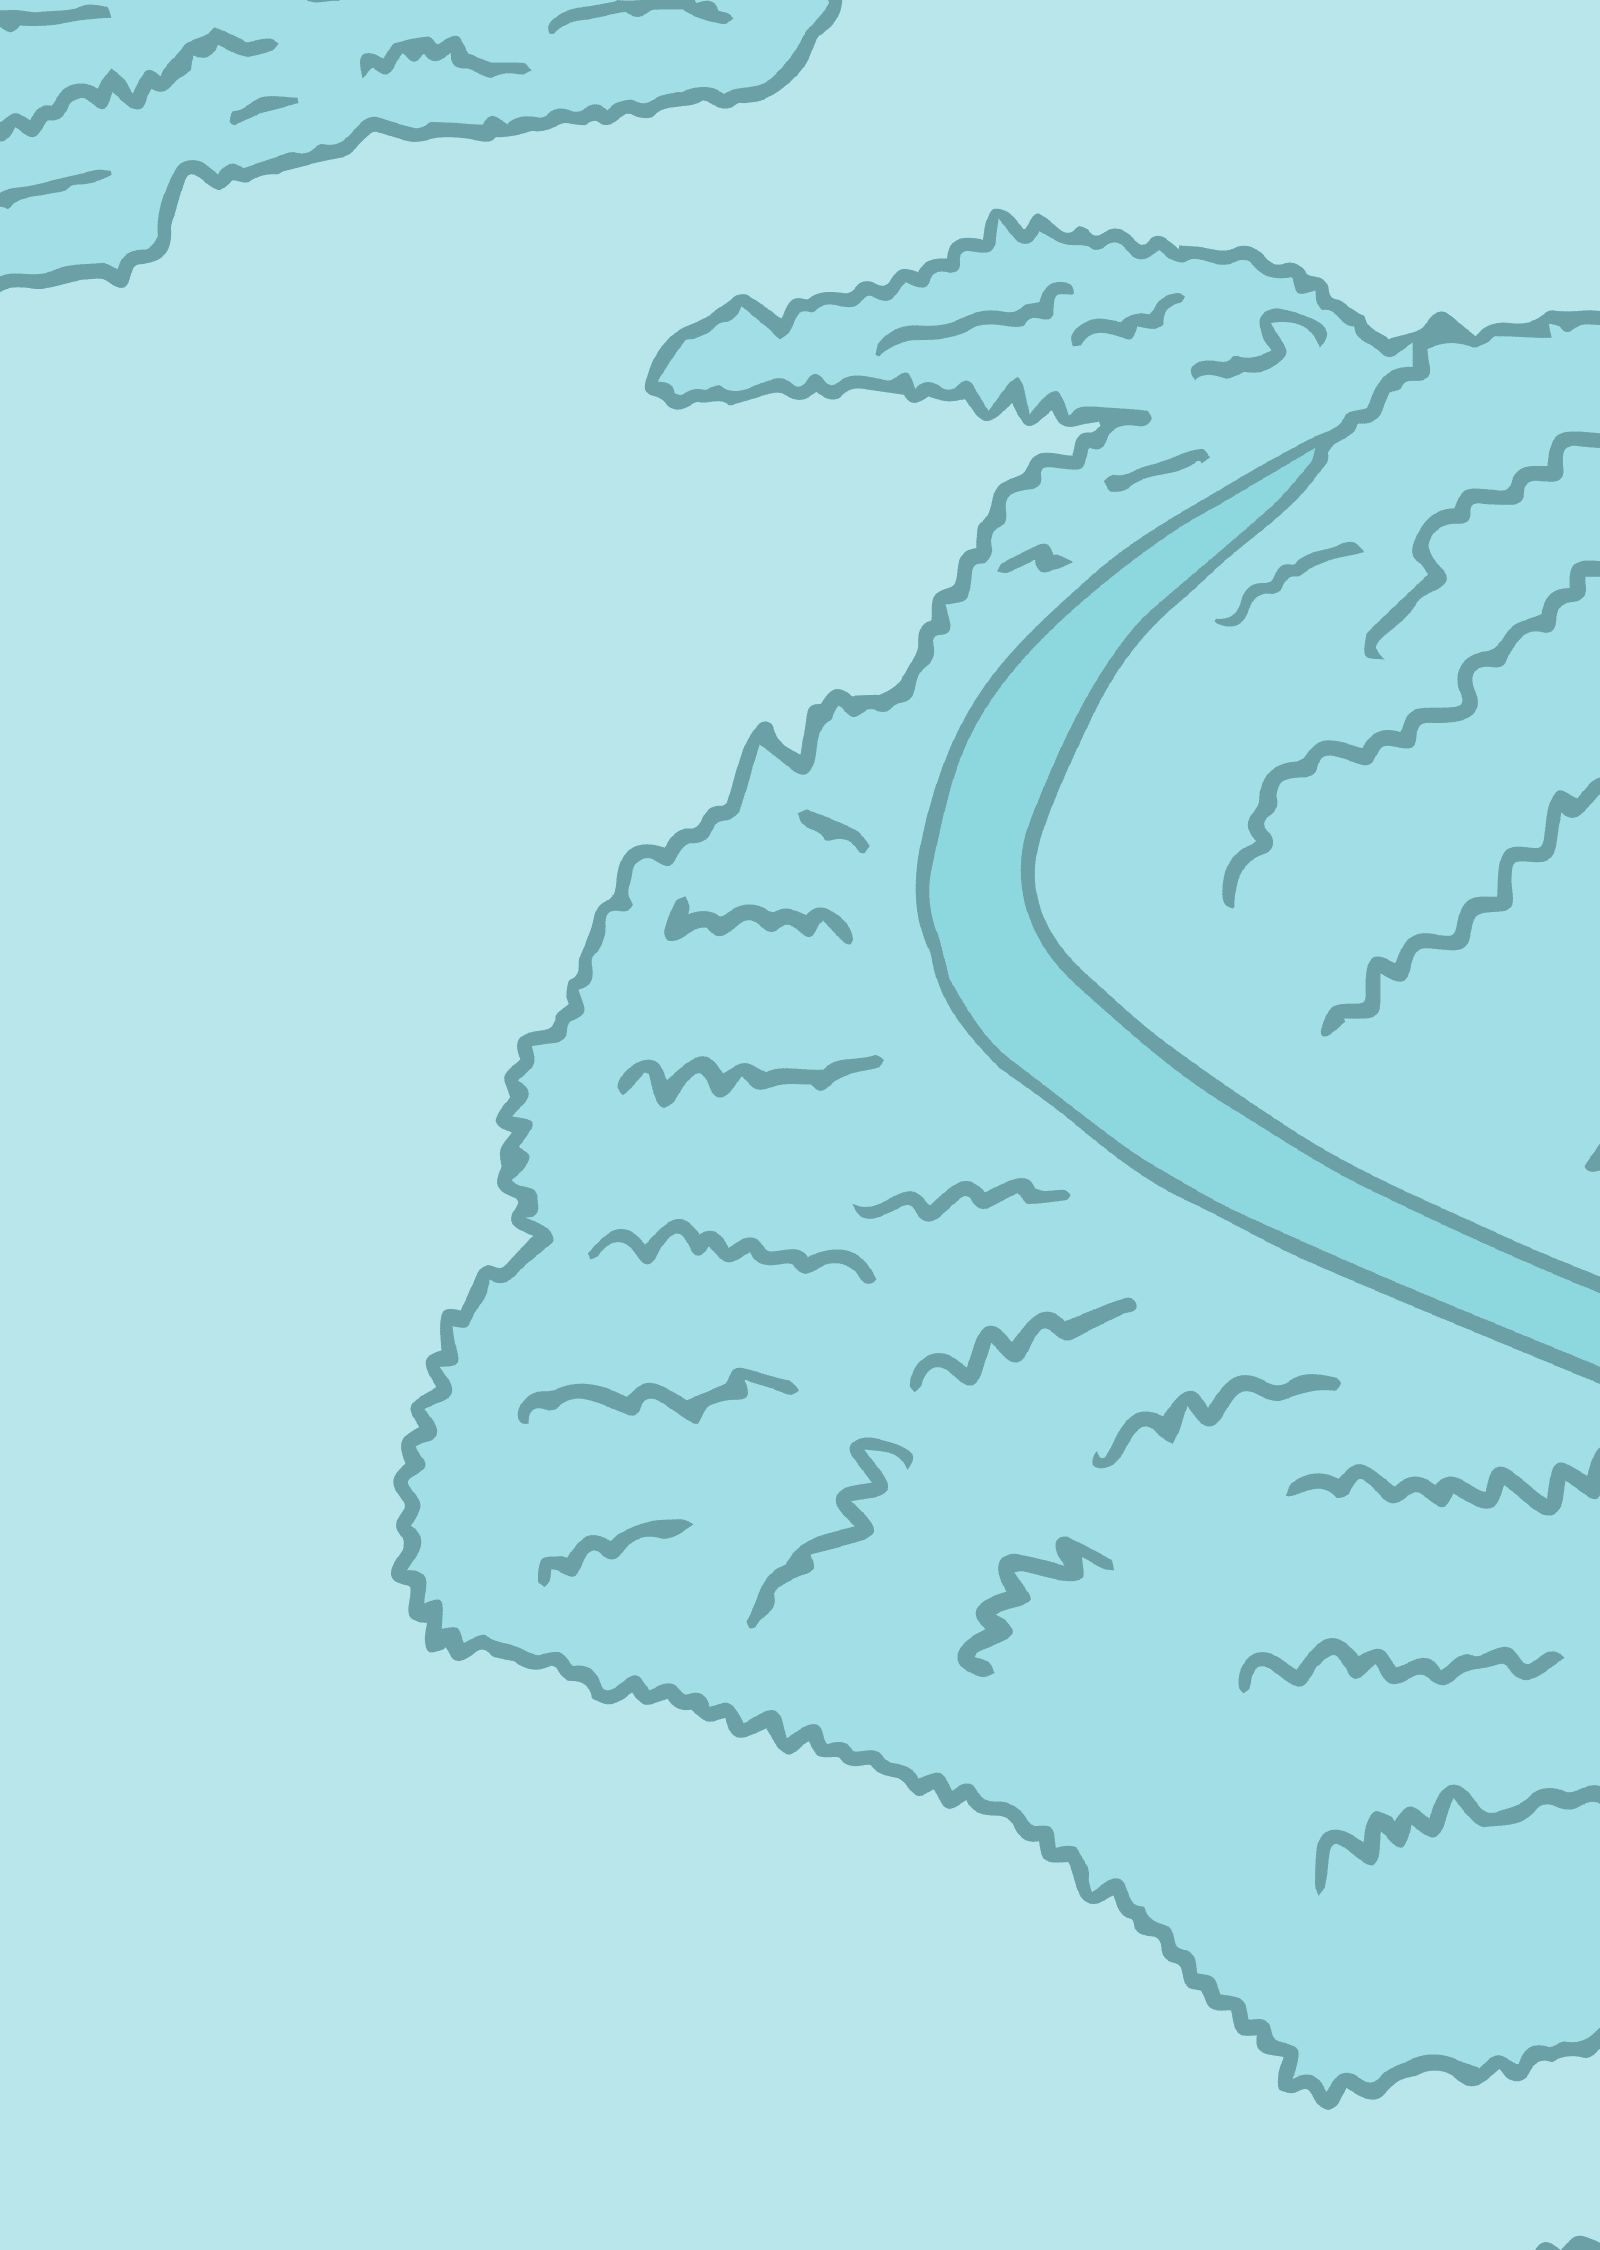 An illustration of rivers in monochromatic blue